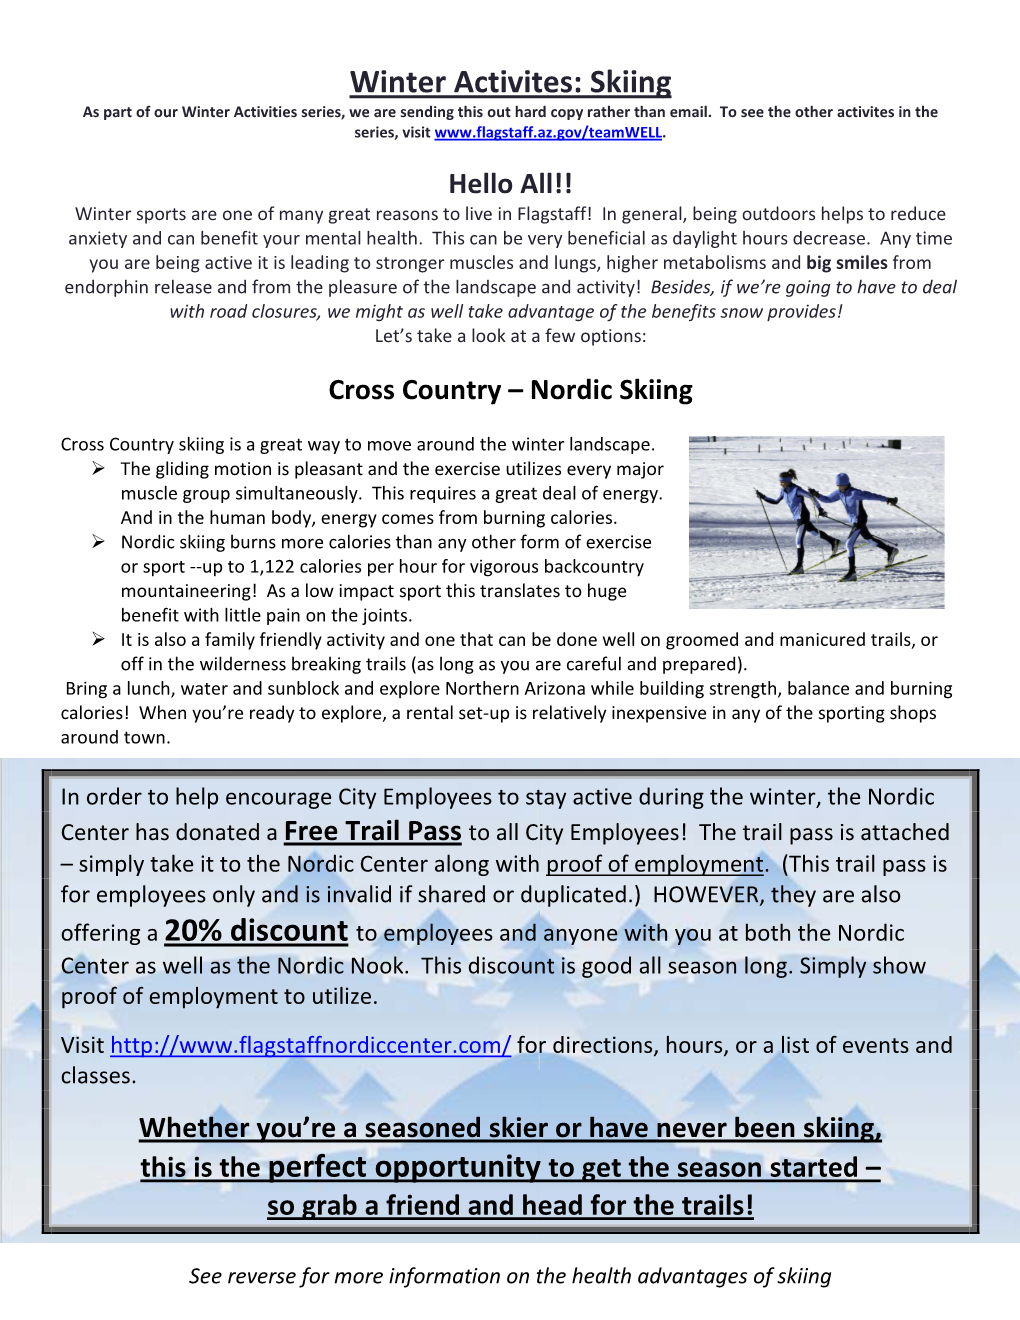 Winter Activites: Skiing As Part of Our Winter Activities Series, We Are Sending This out Hard Copy Rather Than Email